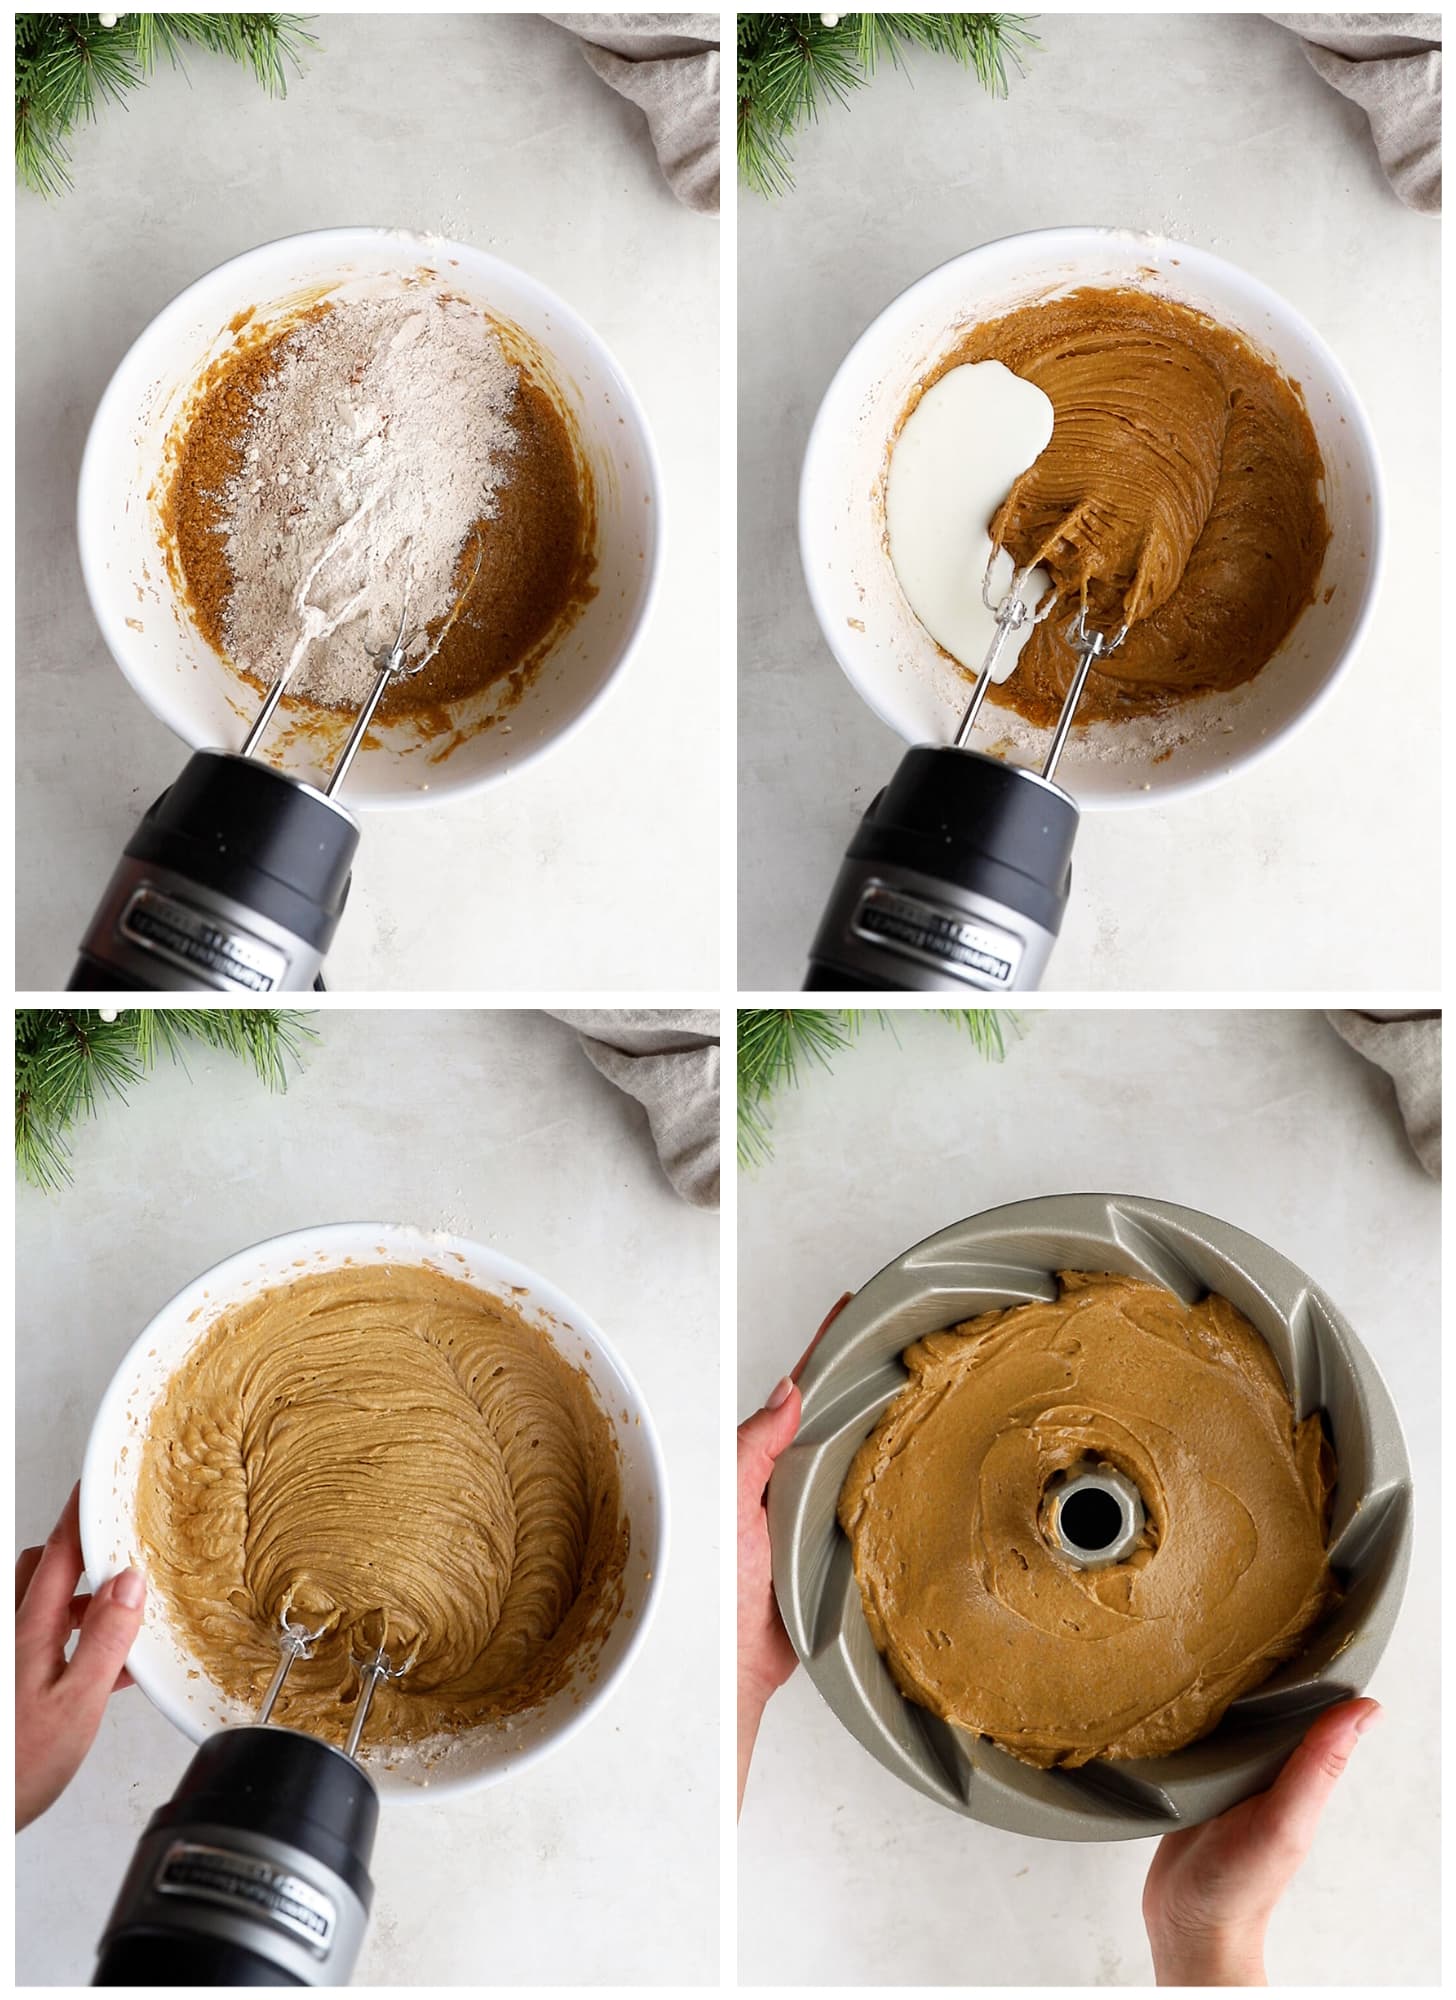 photo collage demonstrating how to make gingerbread bundt cake in a mixing bowl with a hand mixer and in a bundt cake pan.